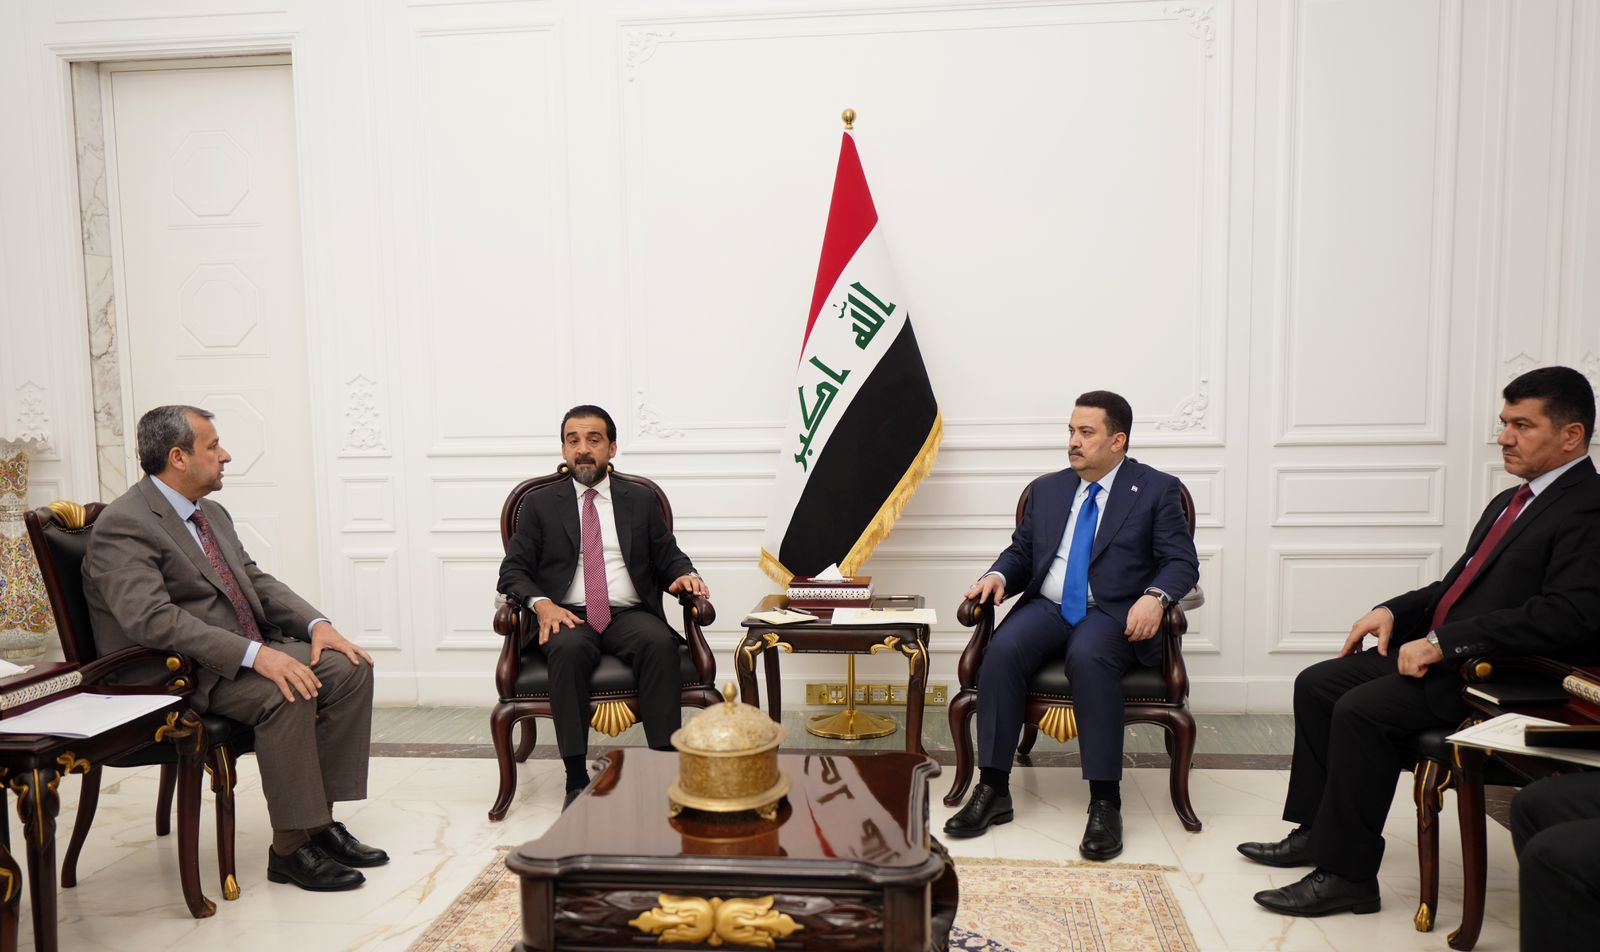 Iraq's Parliament Speaker and Prime Minister discuss preparations for provincial election